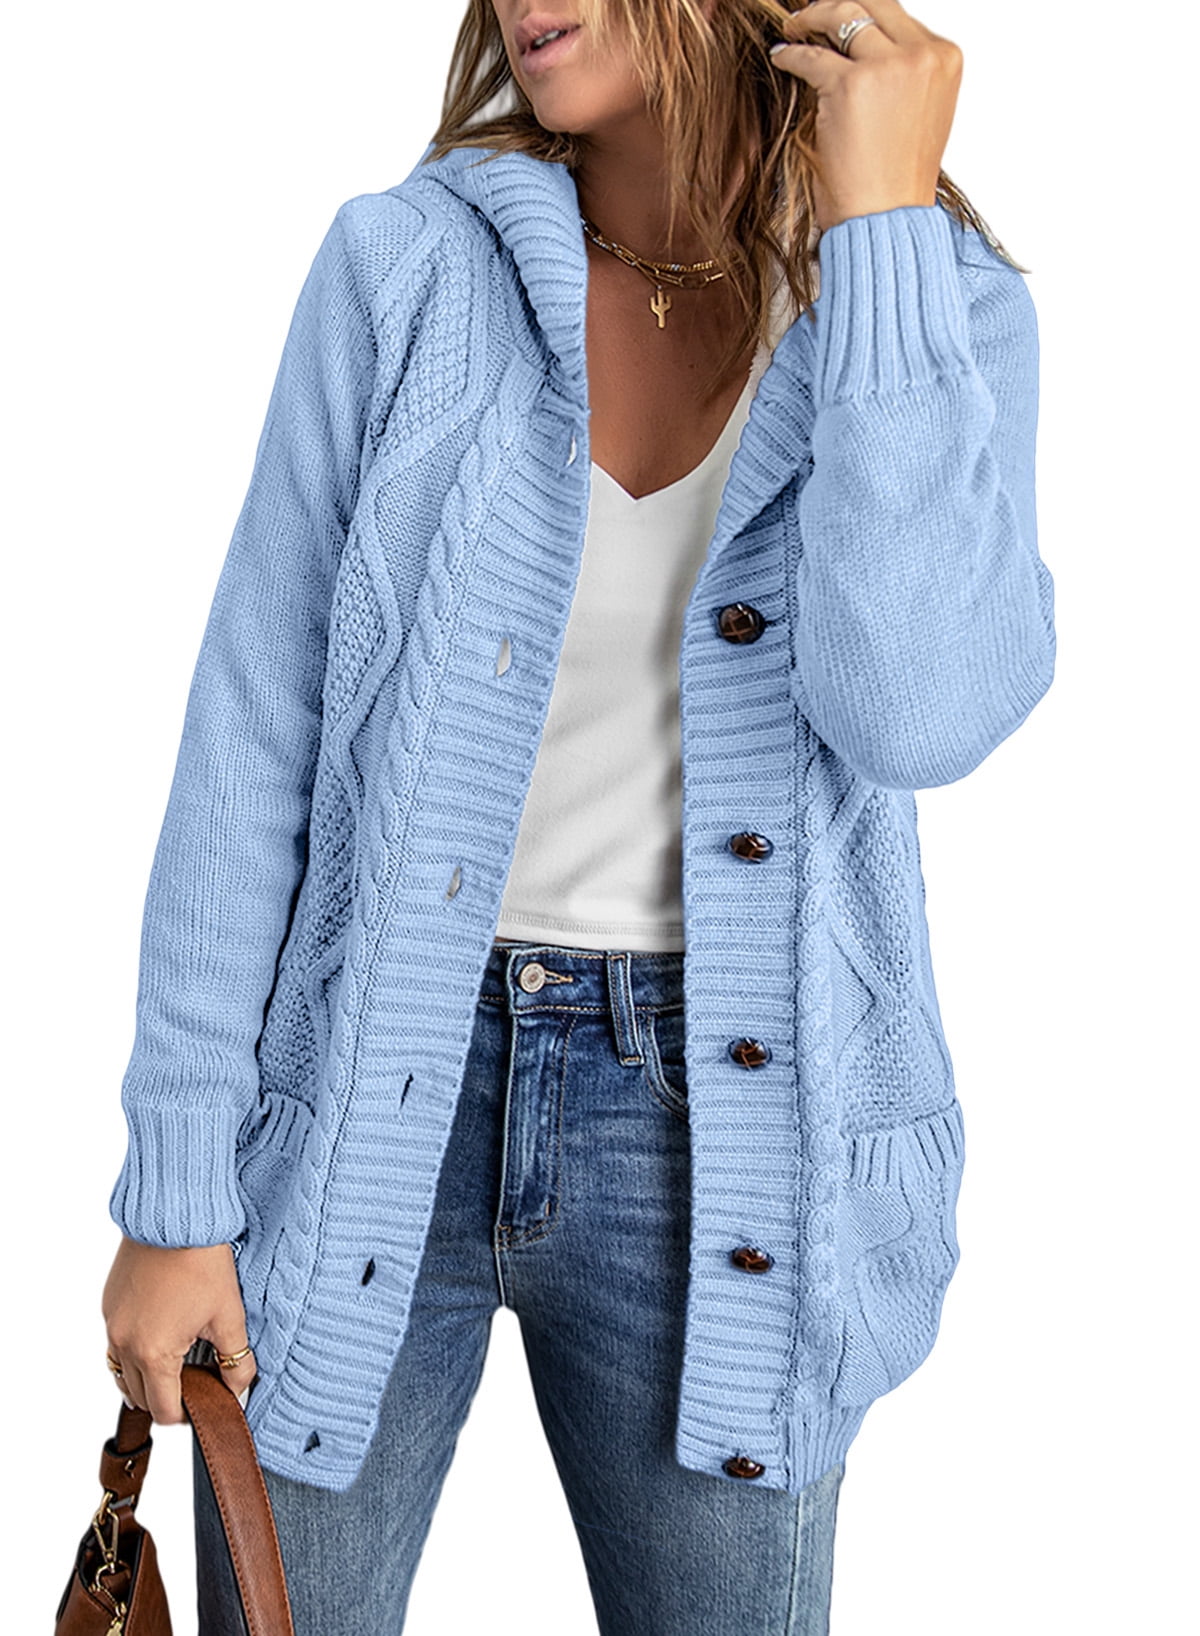 Eytino Hooded Cardigans Sweaters for Women Button Down Cable Knit ...